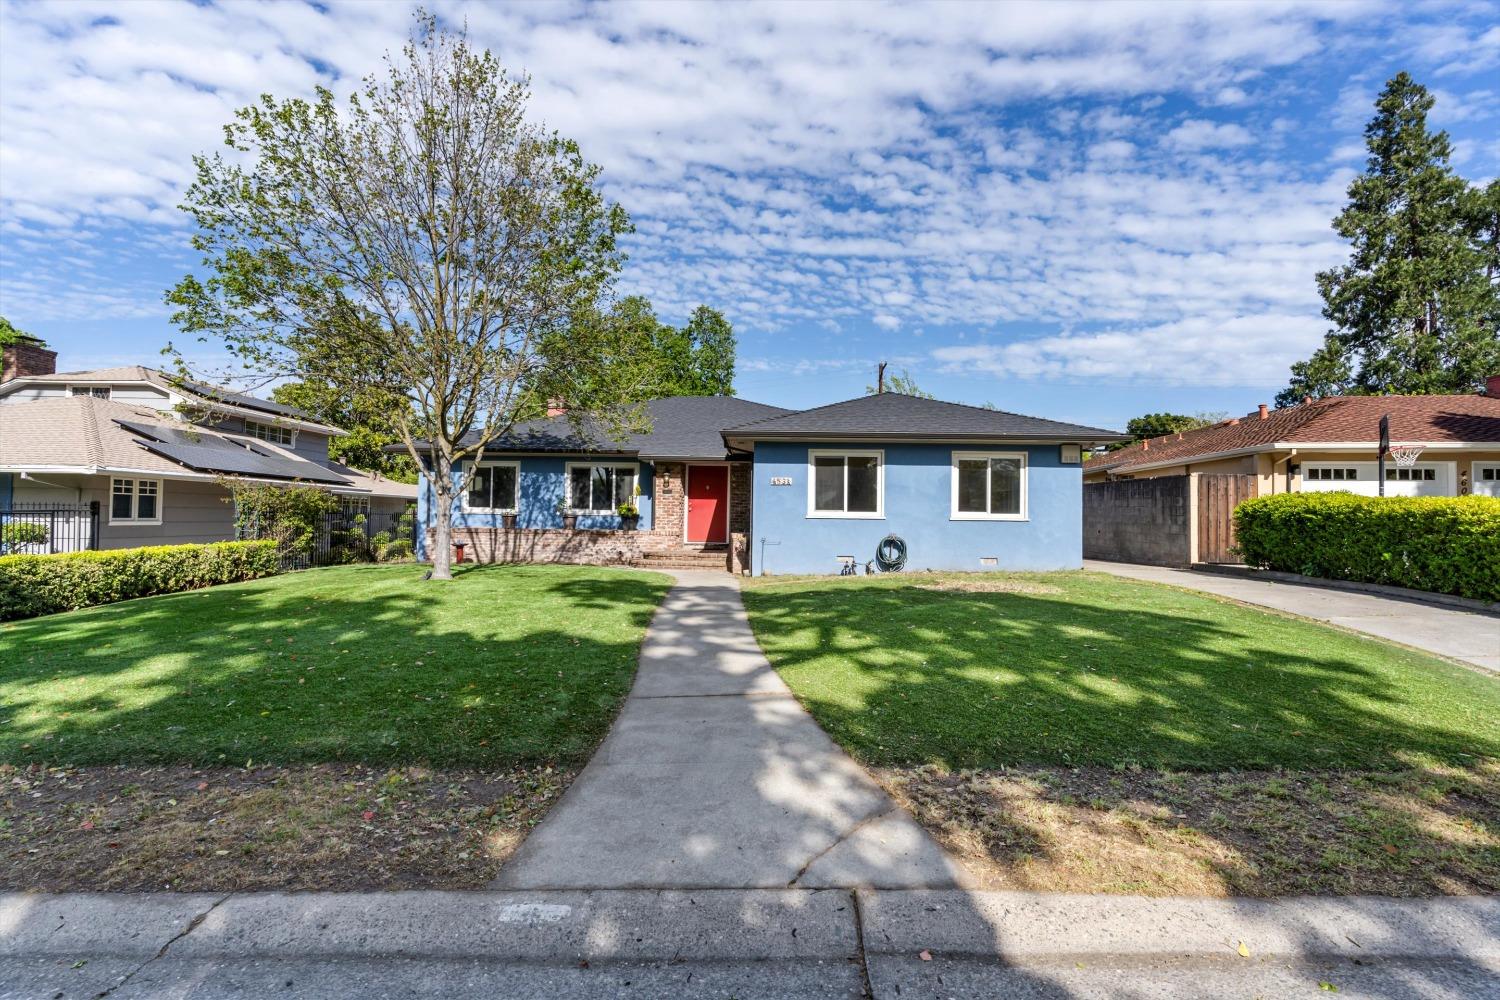 Photo of 4531 S Land Park Dr in Sacramento, CA